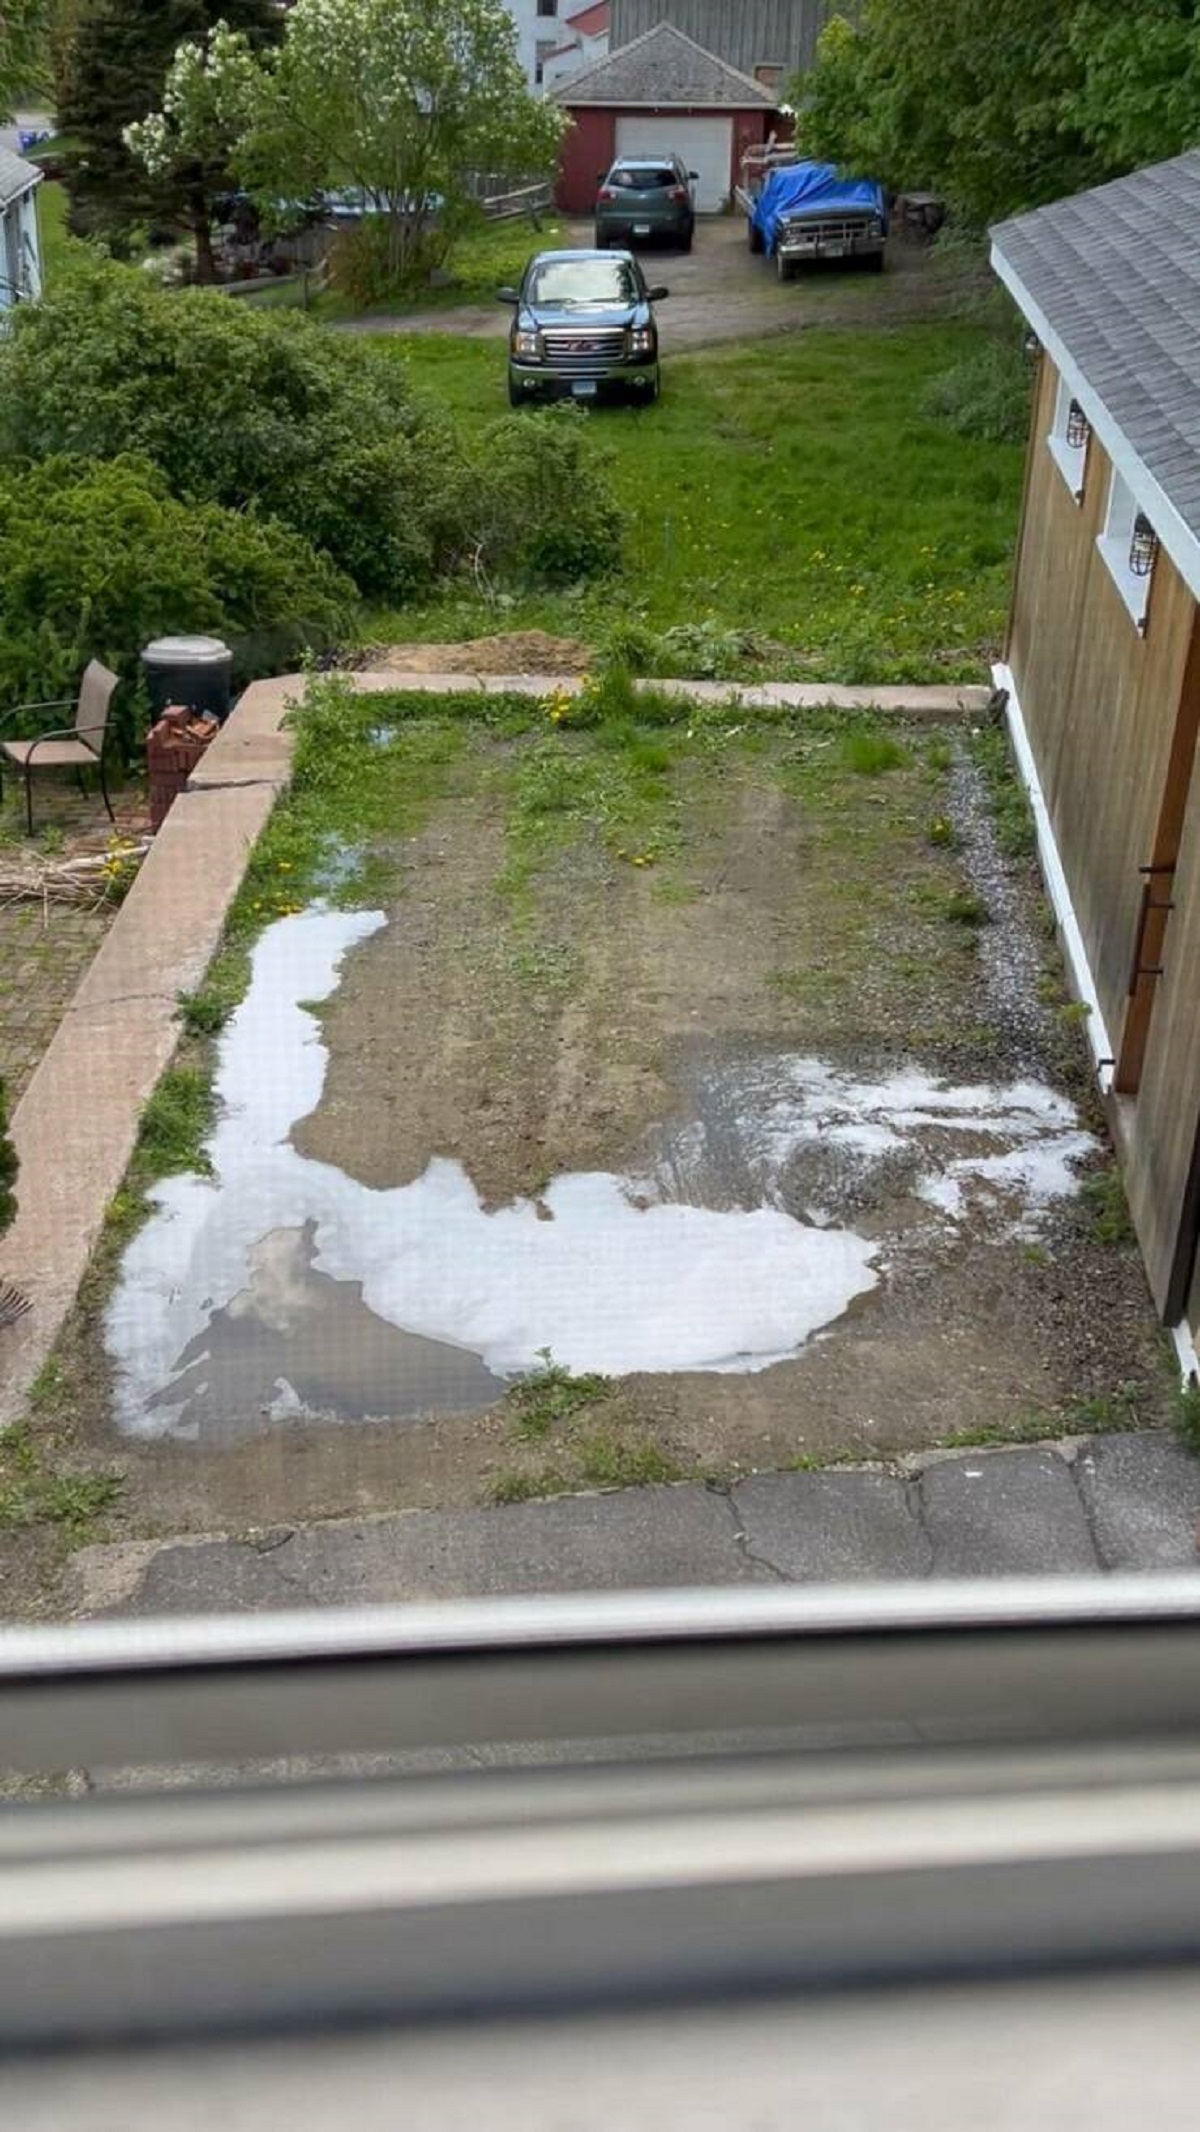 "My landlord decided to set up his washing machine in the garage. That spot is our assigned parking space."